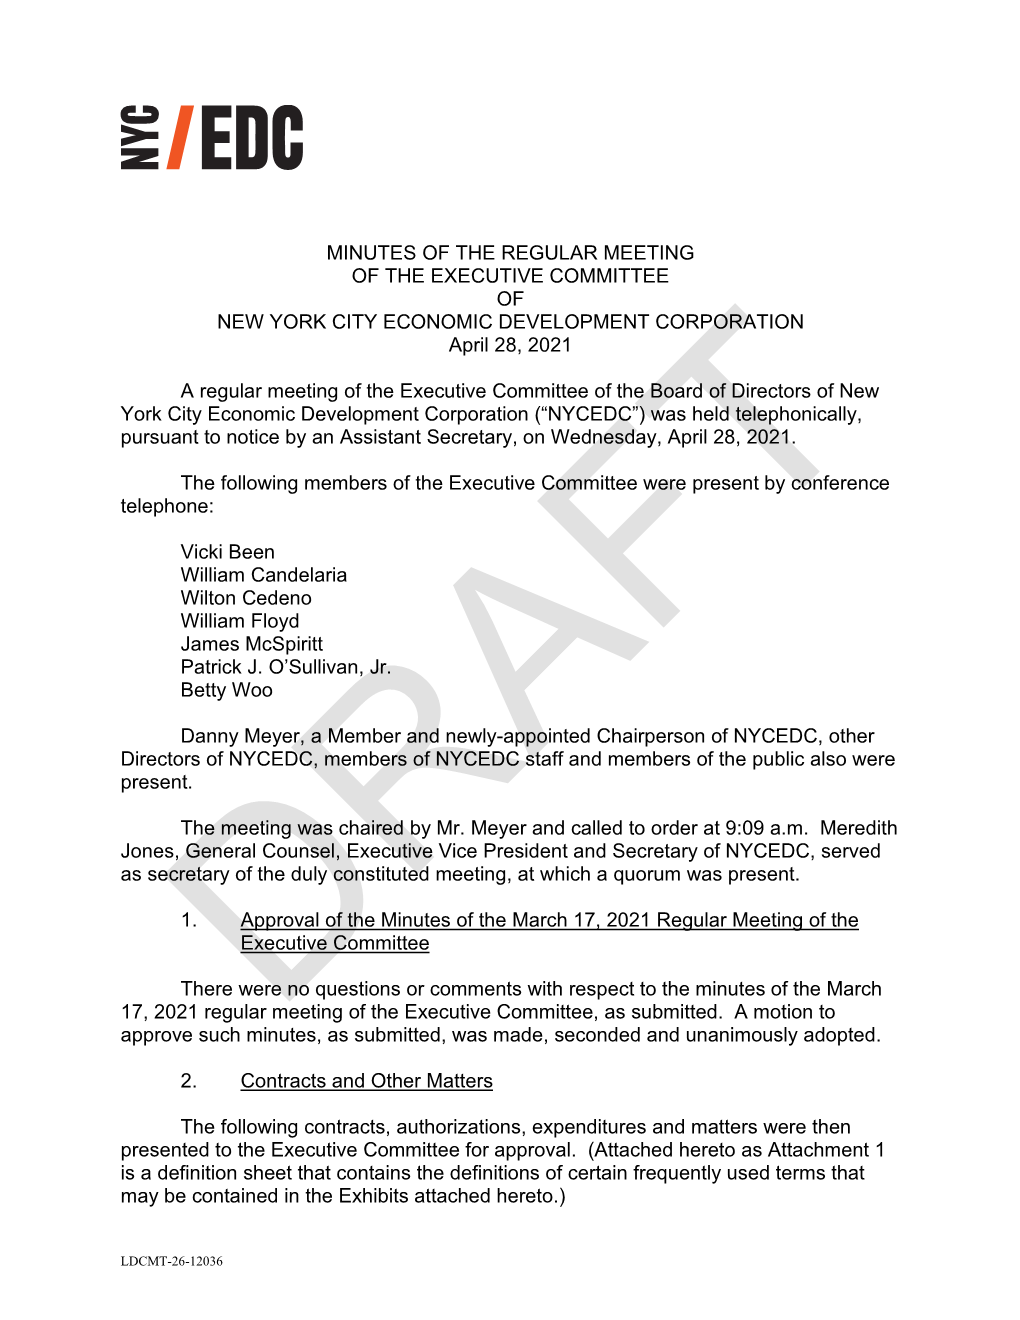 MINUTES of the REGULAR MEETING of the EXECUTIVE COMMITTEE of NEW YORK CITY ECONOMIC DEVELOPMENT CORPORATION April 28, 2021